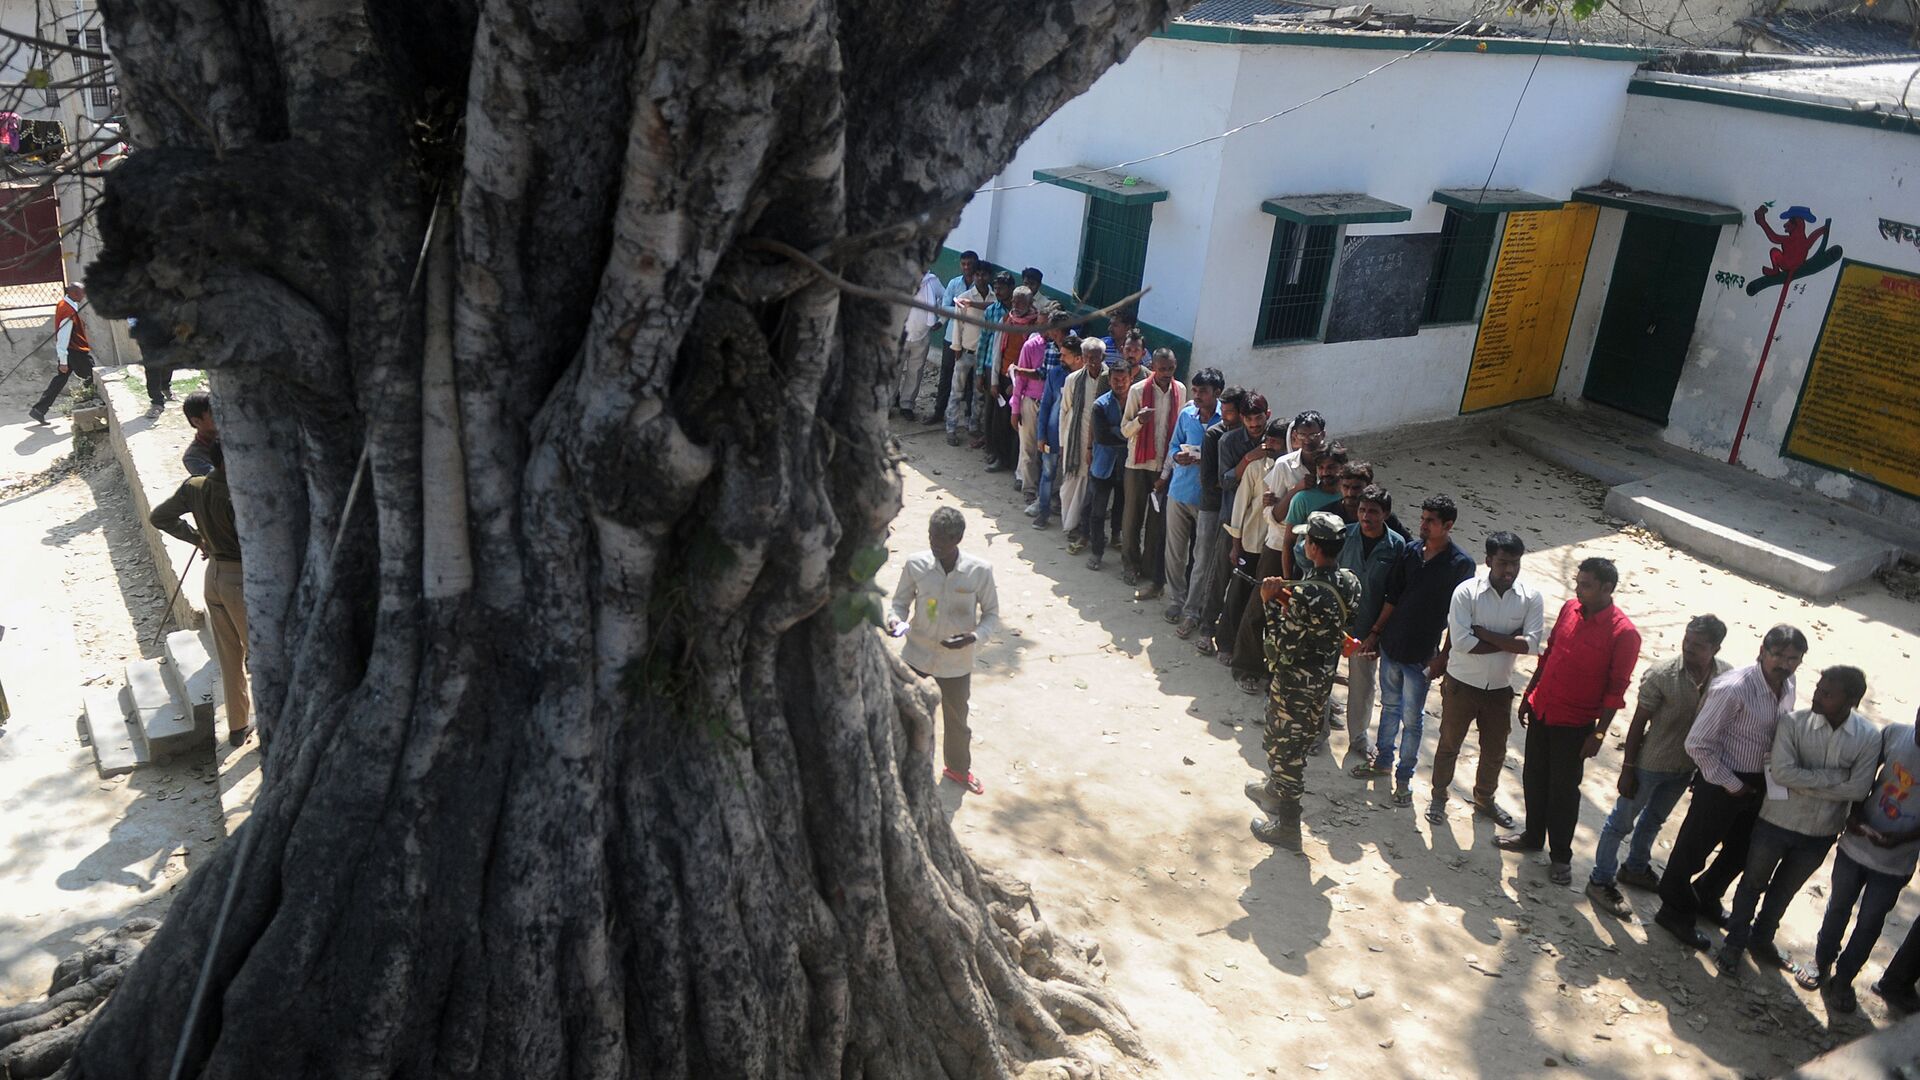 Indian voters wait in a queue for their turn to vote at a polling station in the Naini area on the outskirts of Allahabad during the fourth phase of Uttar Pradesh state assembly elections on February 23, 2017 - Sputnik International, 1920, 06.02.2022